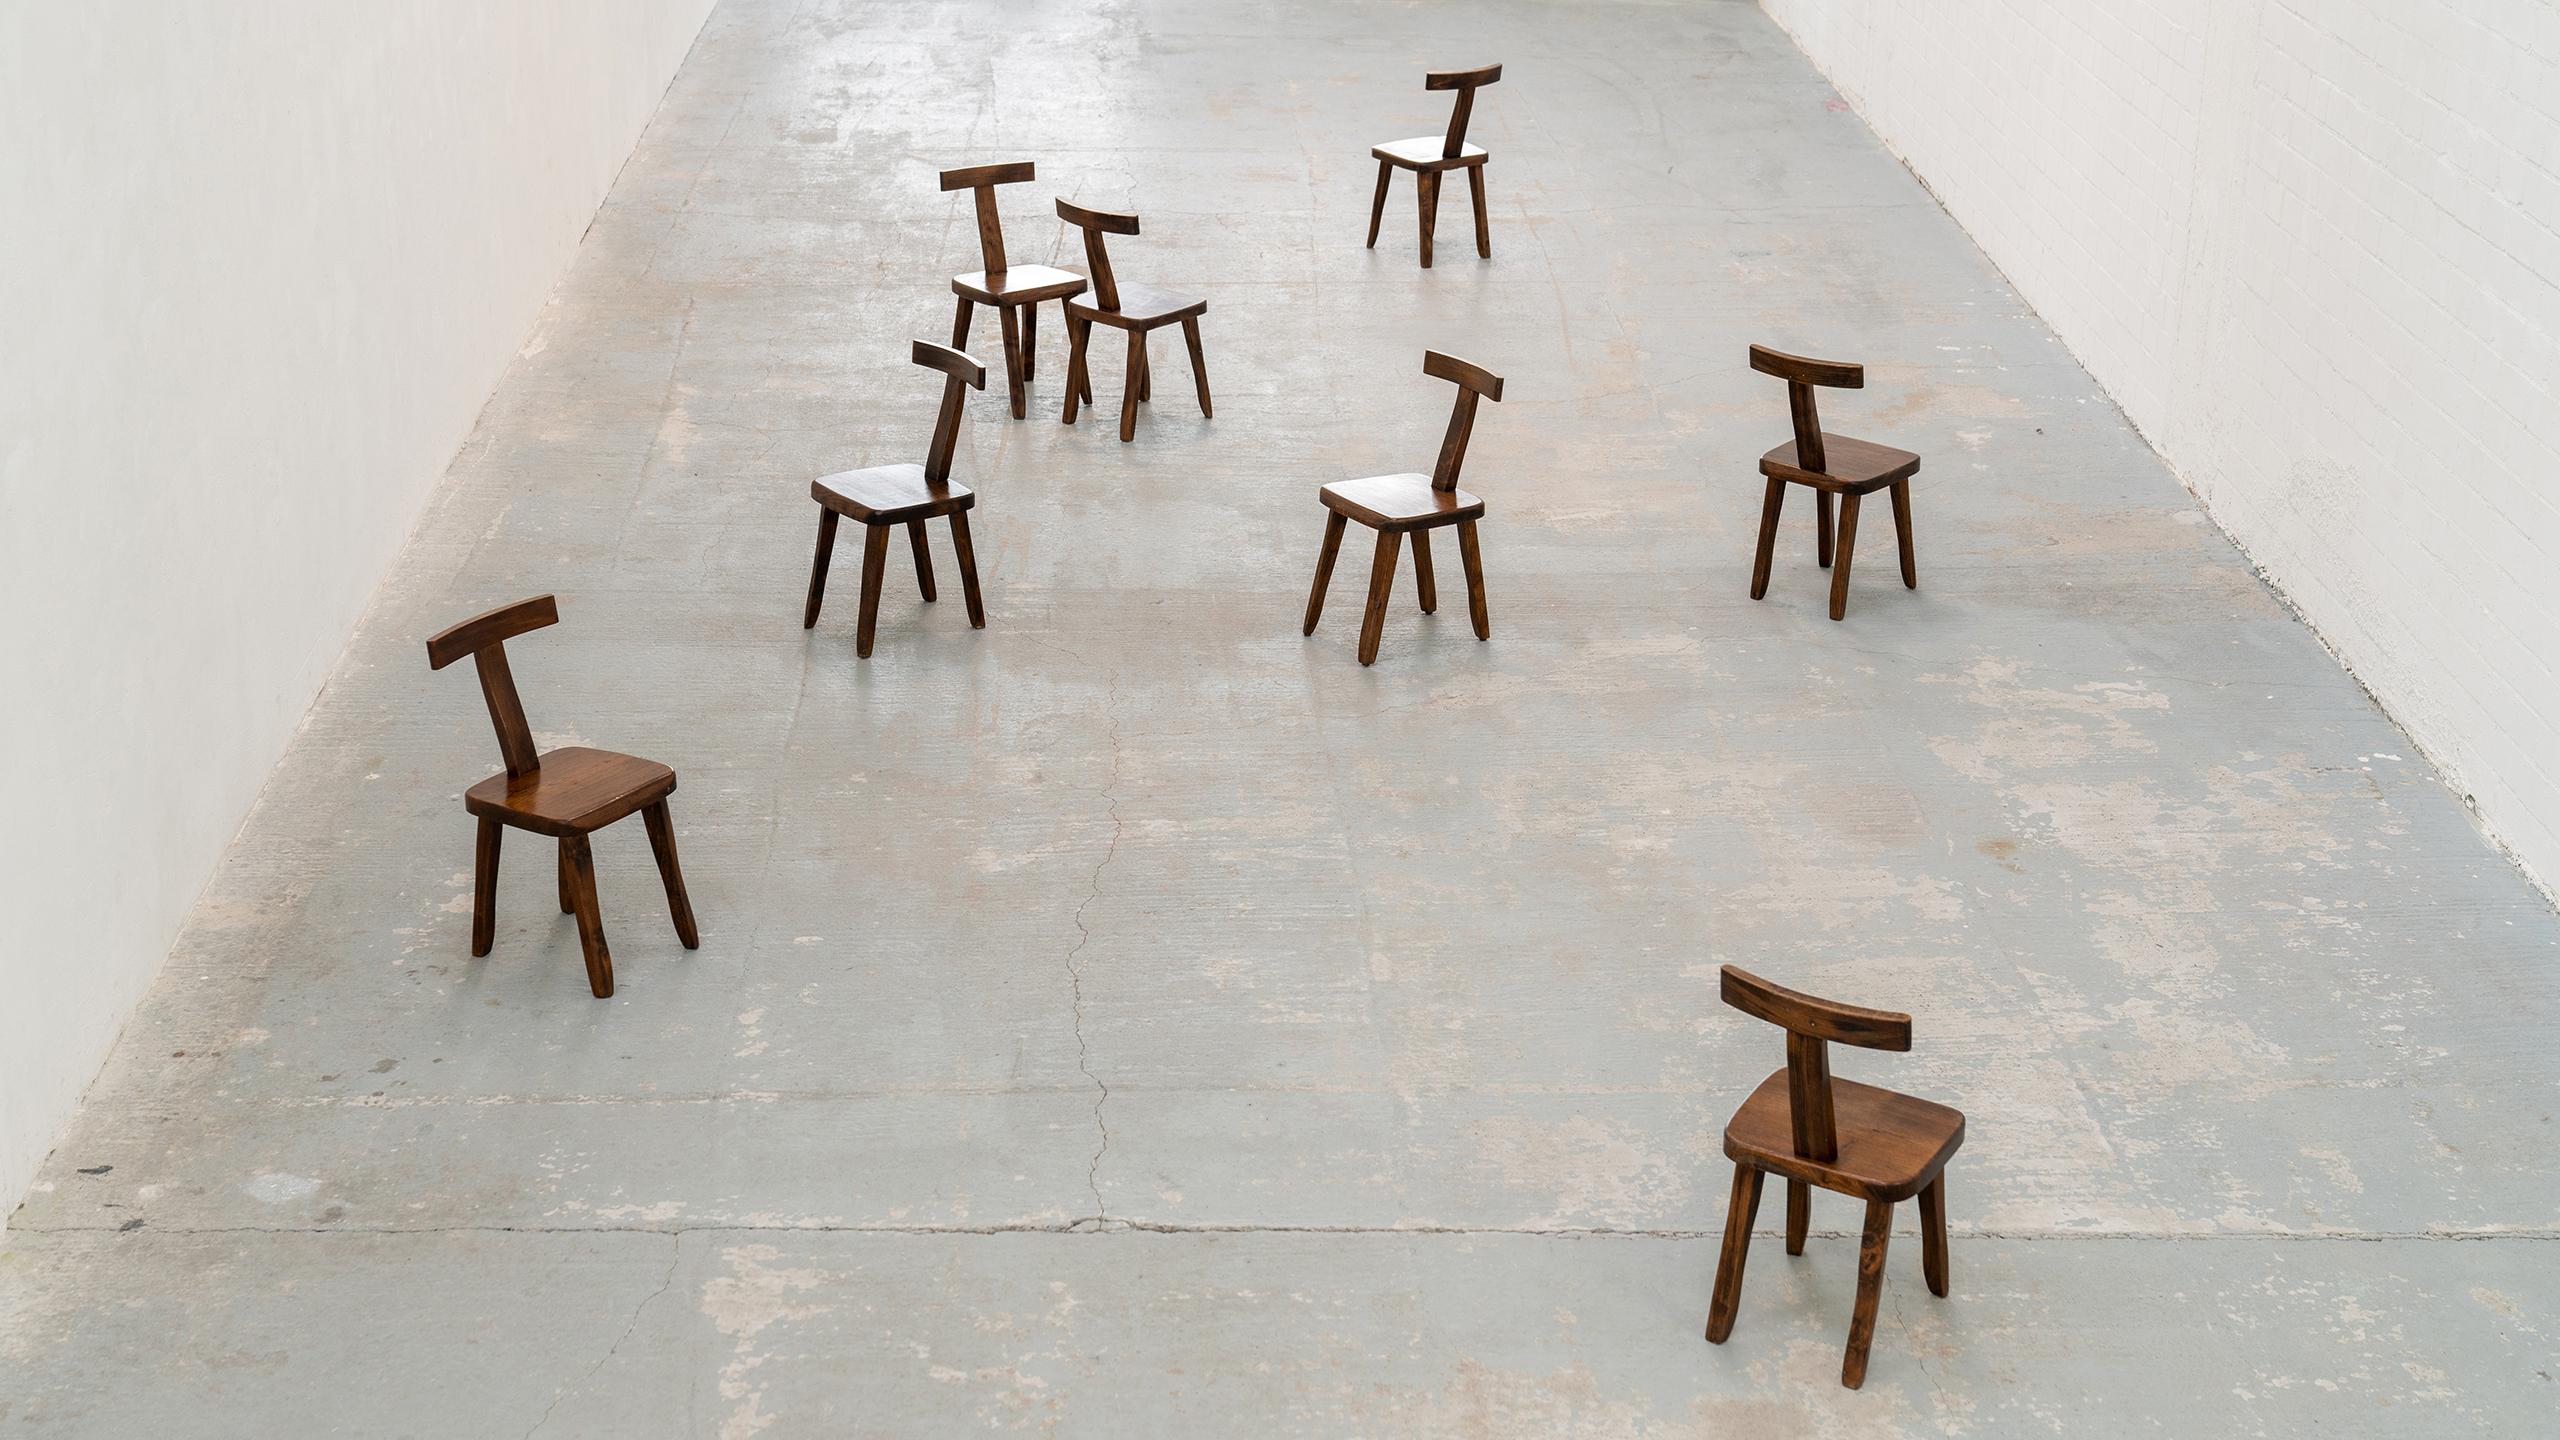 Brutalistic & Minimalistic - Olavi Hänninen - T chairs in solid elm - 1958 for Mikko Nupponen, Finland 
Set of 8 (we can provide 10 chairs if needed)

These solid chairs are made of stained elm wood and sculpturally crafted by hand. 
Rustic,